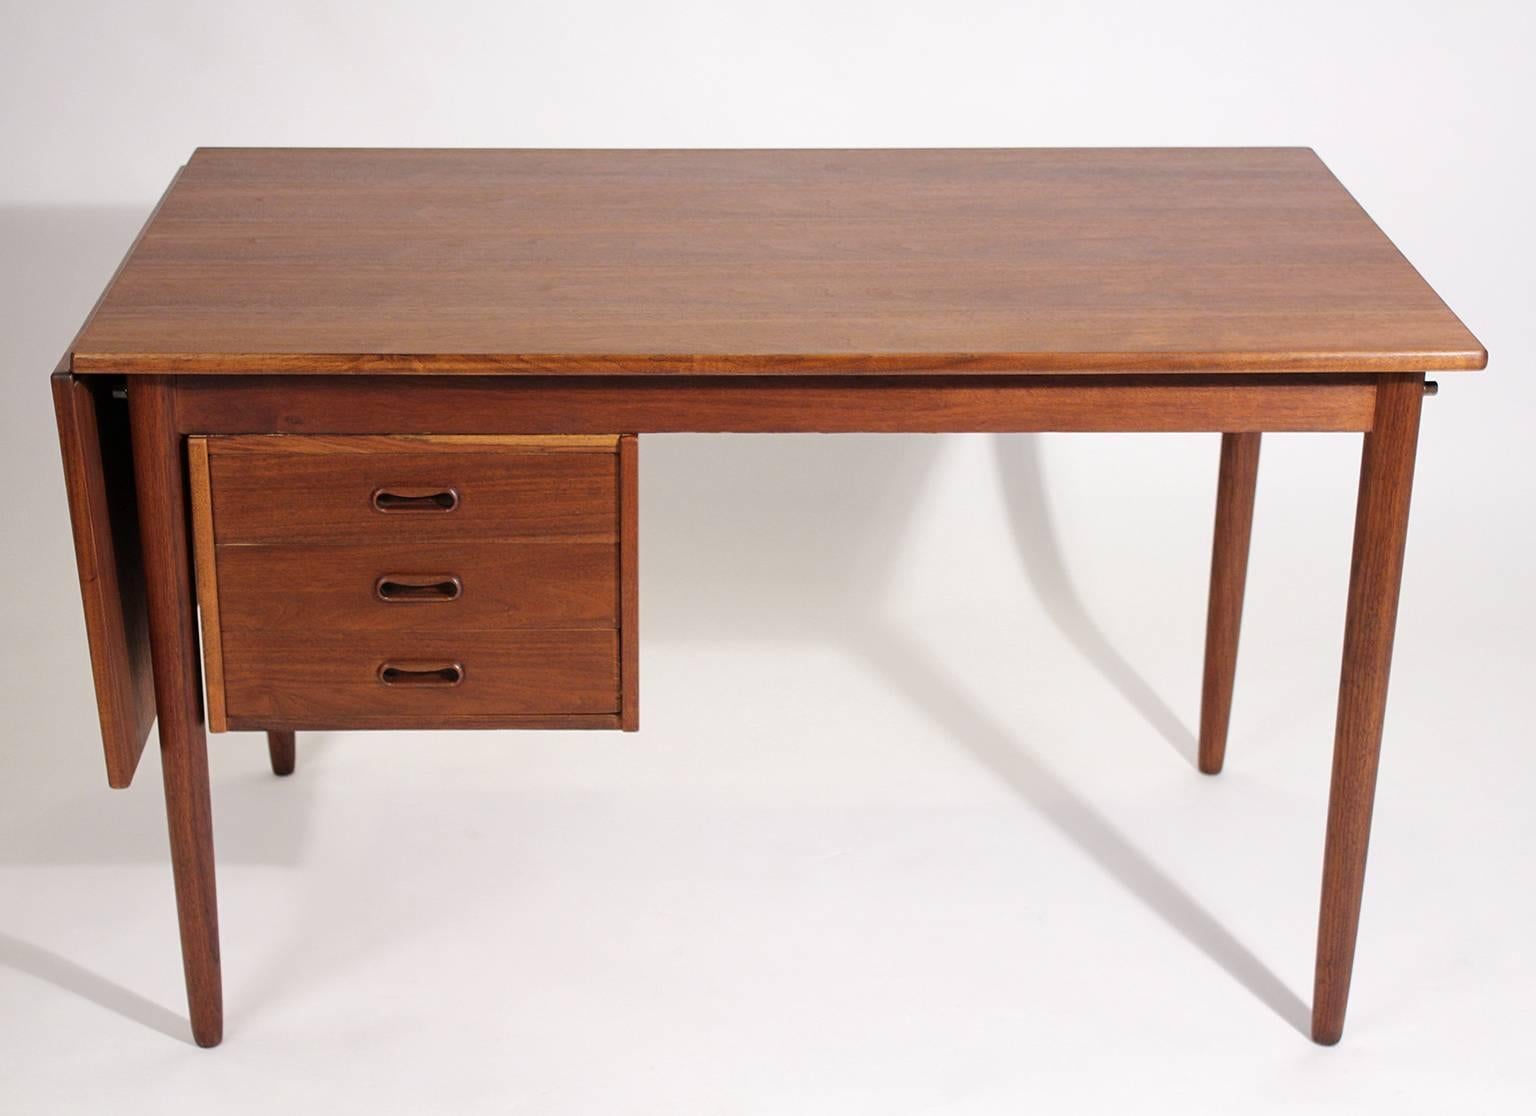 Beautiful teak wood Danish drop-leaf expandable desk designed by Arne Vodder. The desk has a drop leaf that can be used for more room. Drawers can be moved from side to side so you can move your chair to either side. Great design. Desk has wonderful